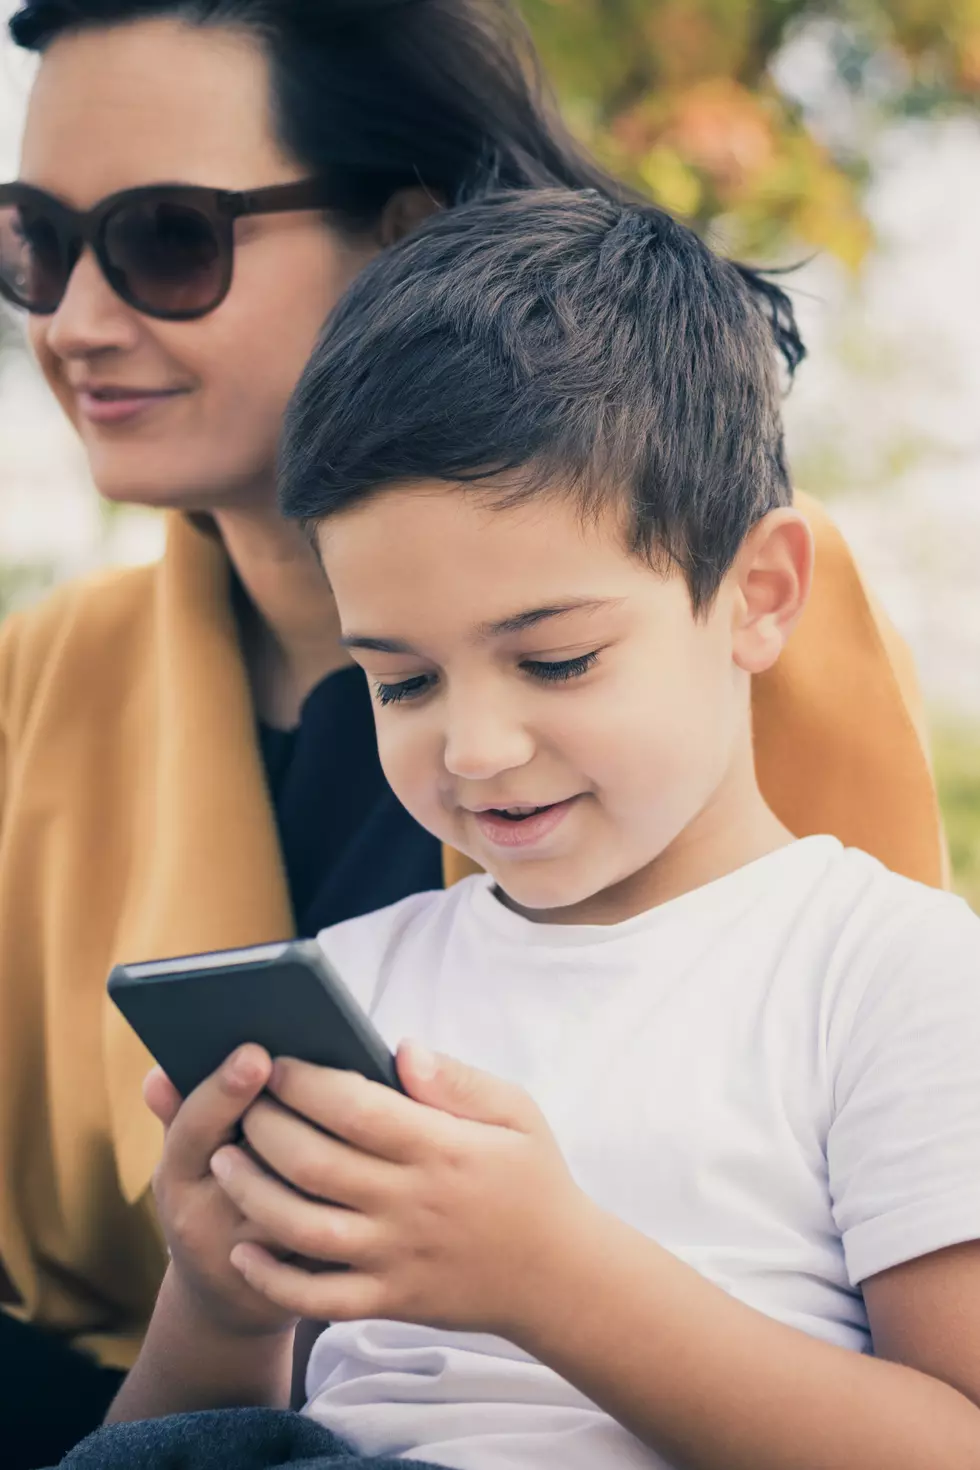 12 Phone Apps All Hudson Valley Parents Should Be Cautious Of